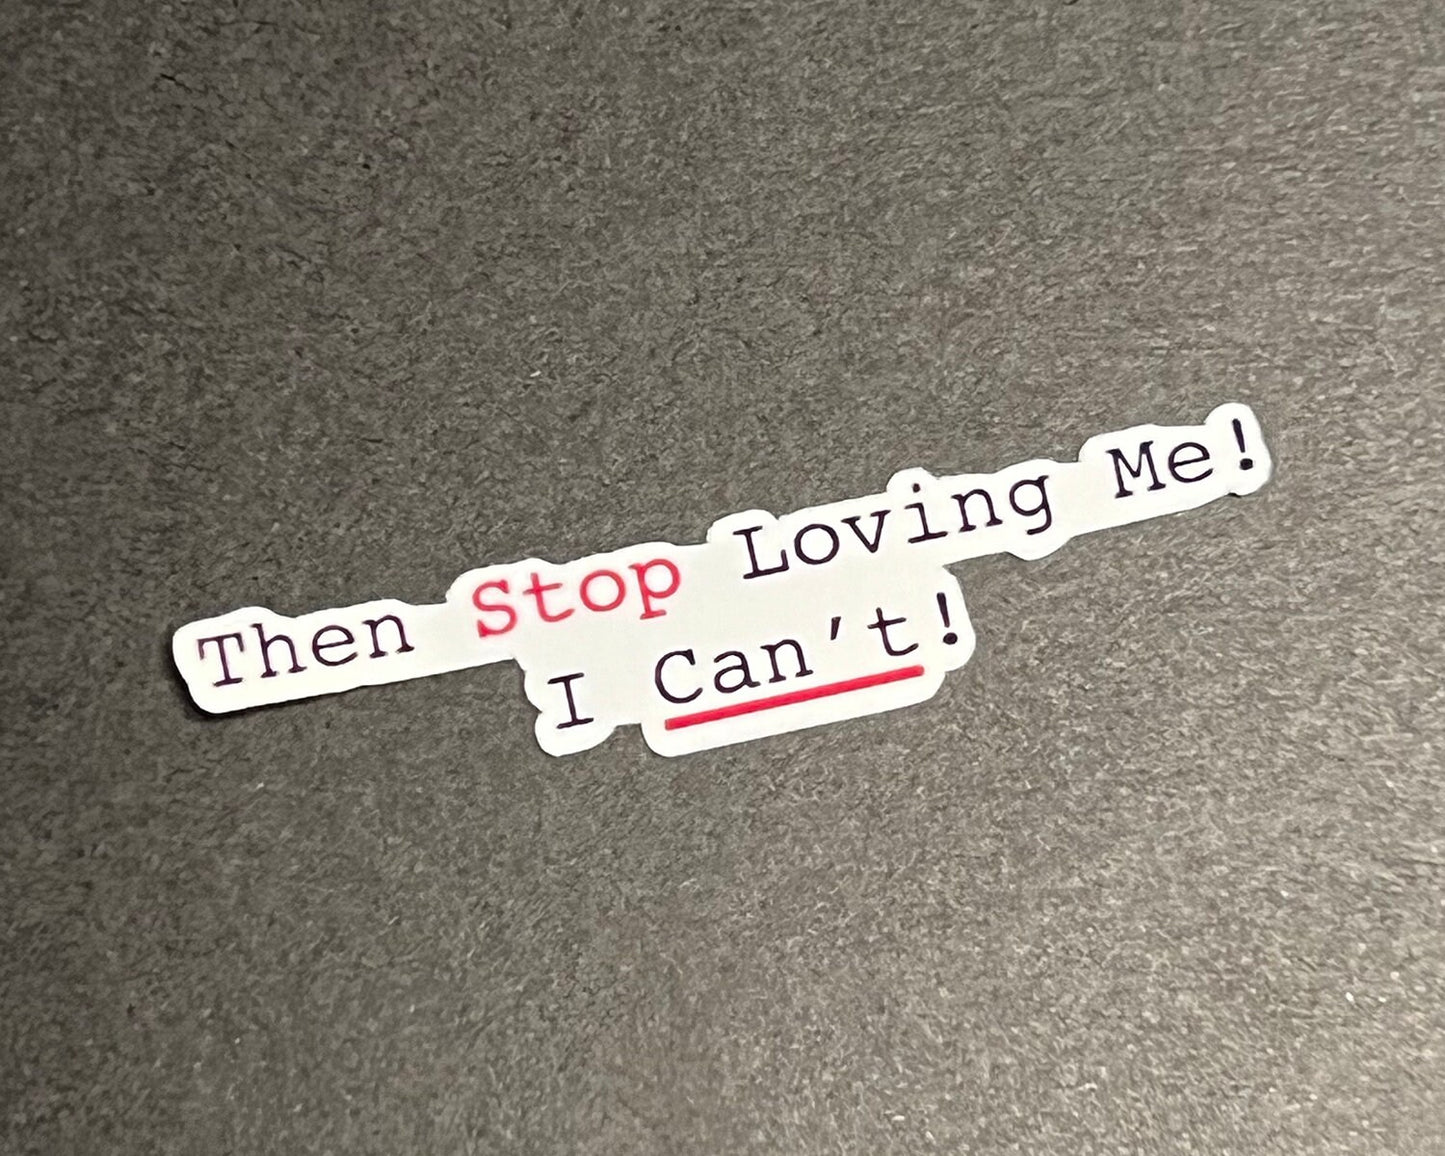 Then Stop Loving Me! I Can't! Waterproof Sticker - The Vampire Dairies Inspired